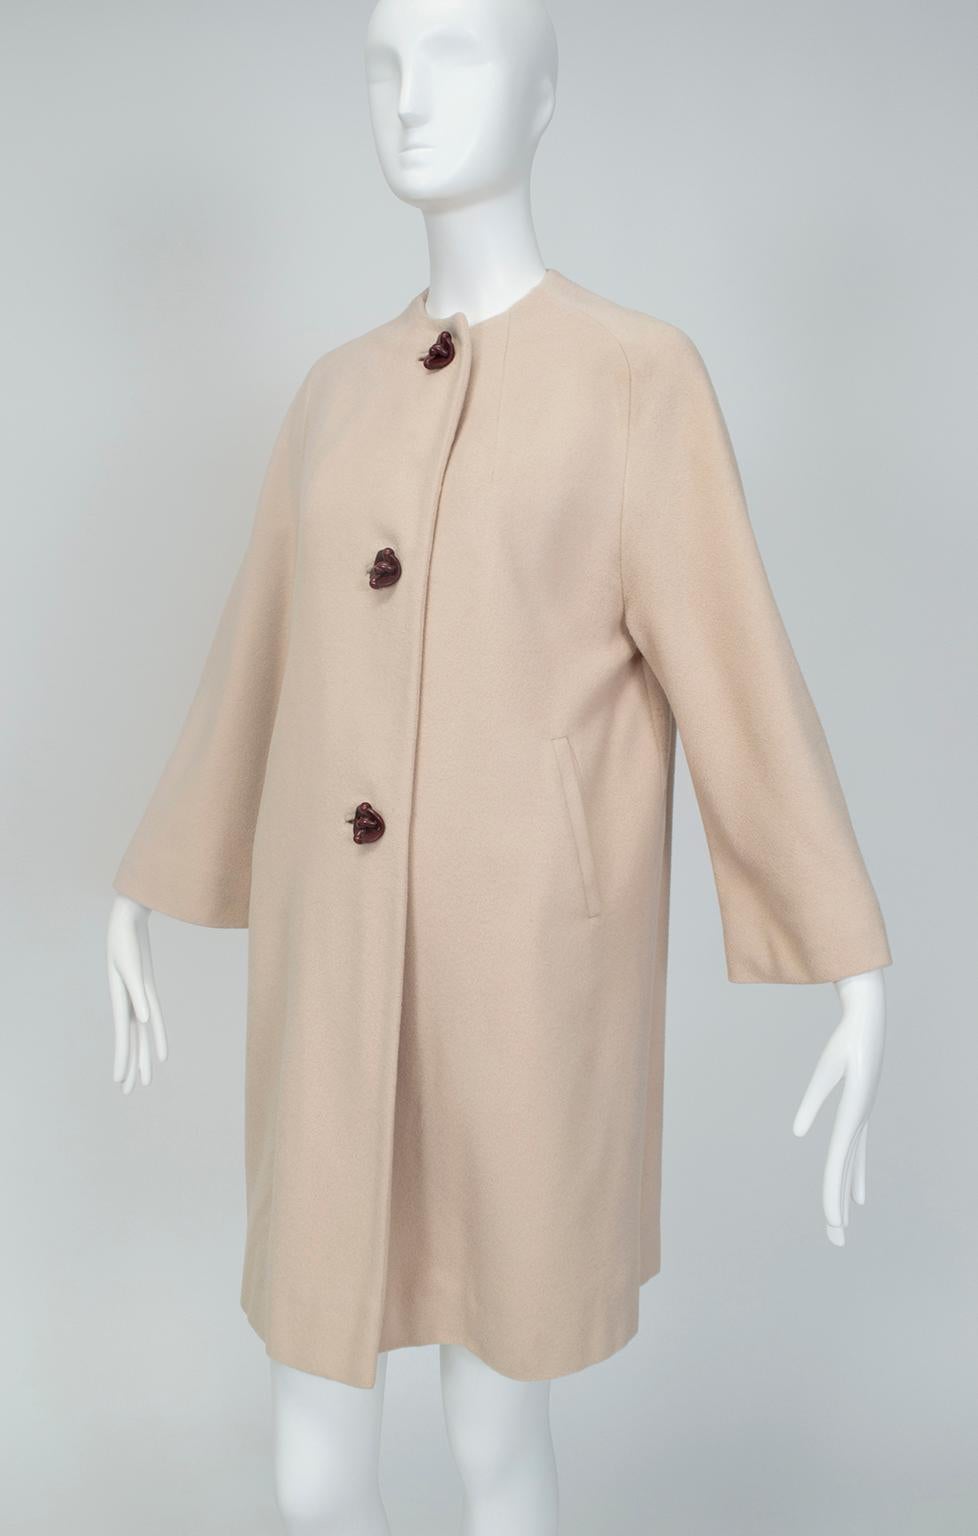 Collarless Taupe Cashmere A-Line Stroller Coat with Bakelite Buttons- S-M, 1960s In Good Condition For Sale In Tucson, AZ